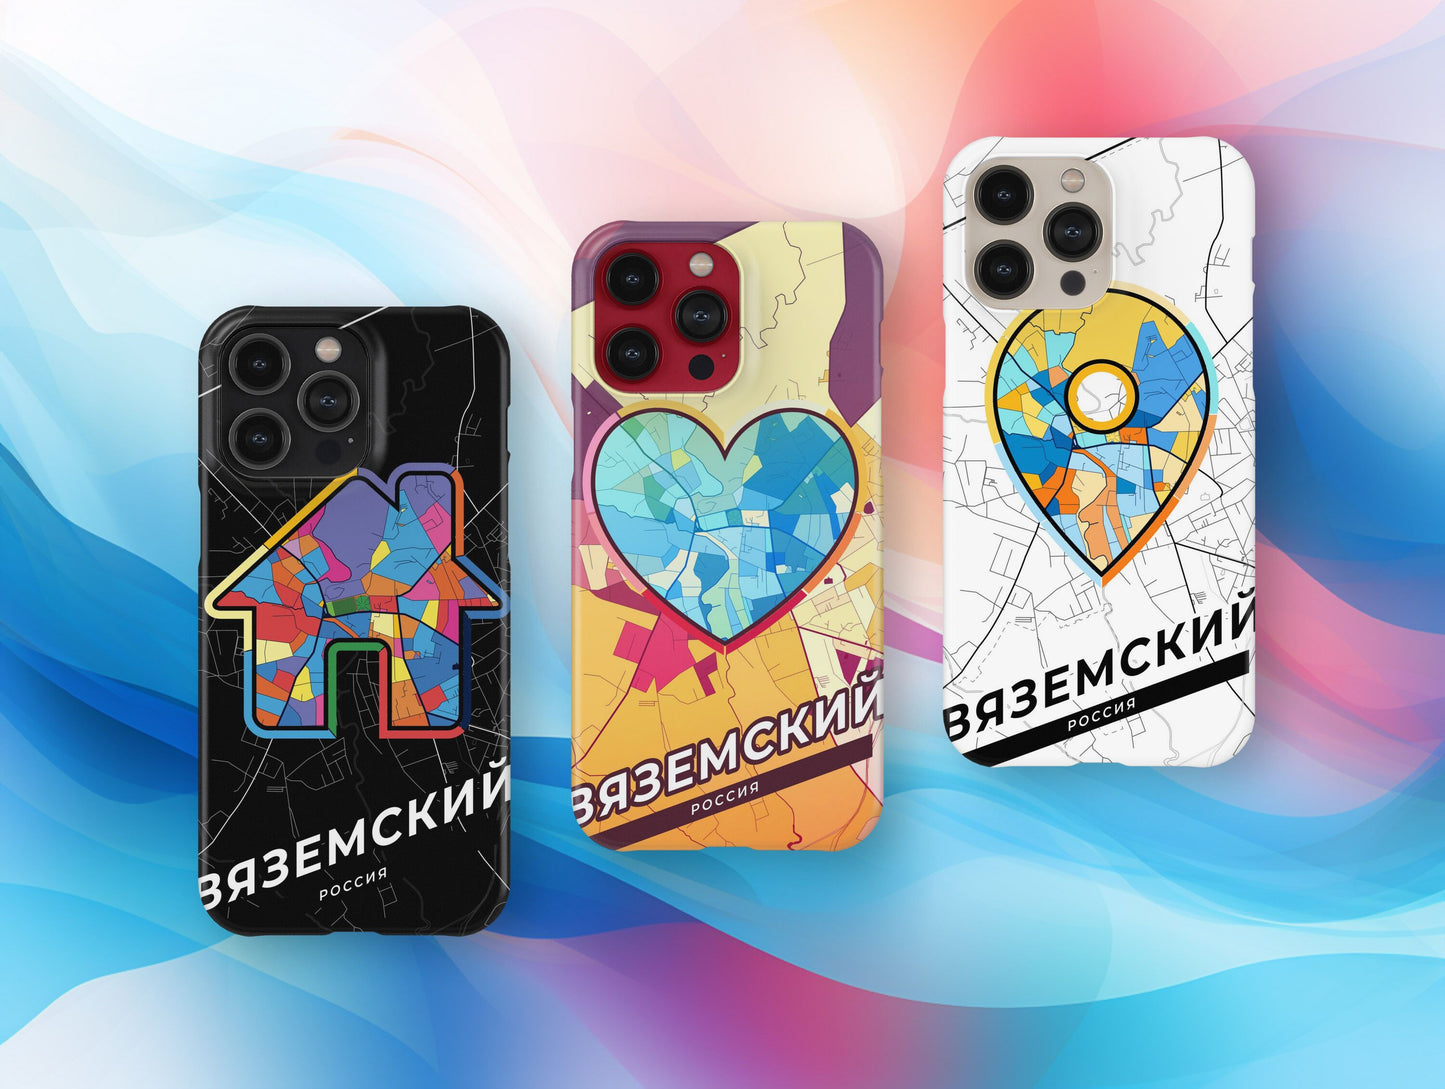 Vyazma Russia slim phone case with colorful icon